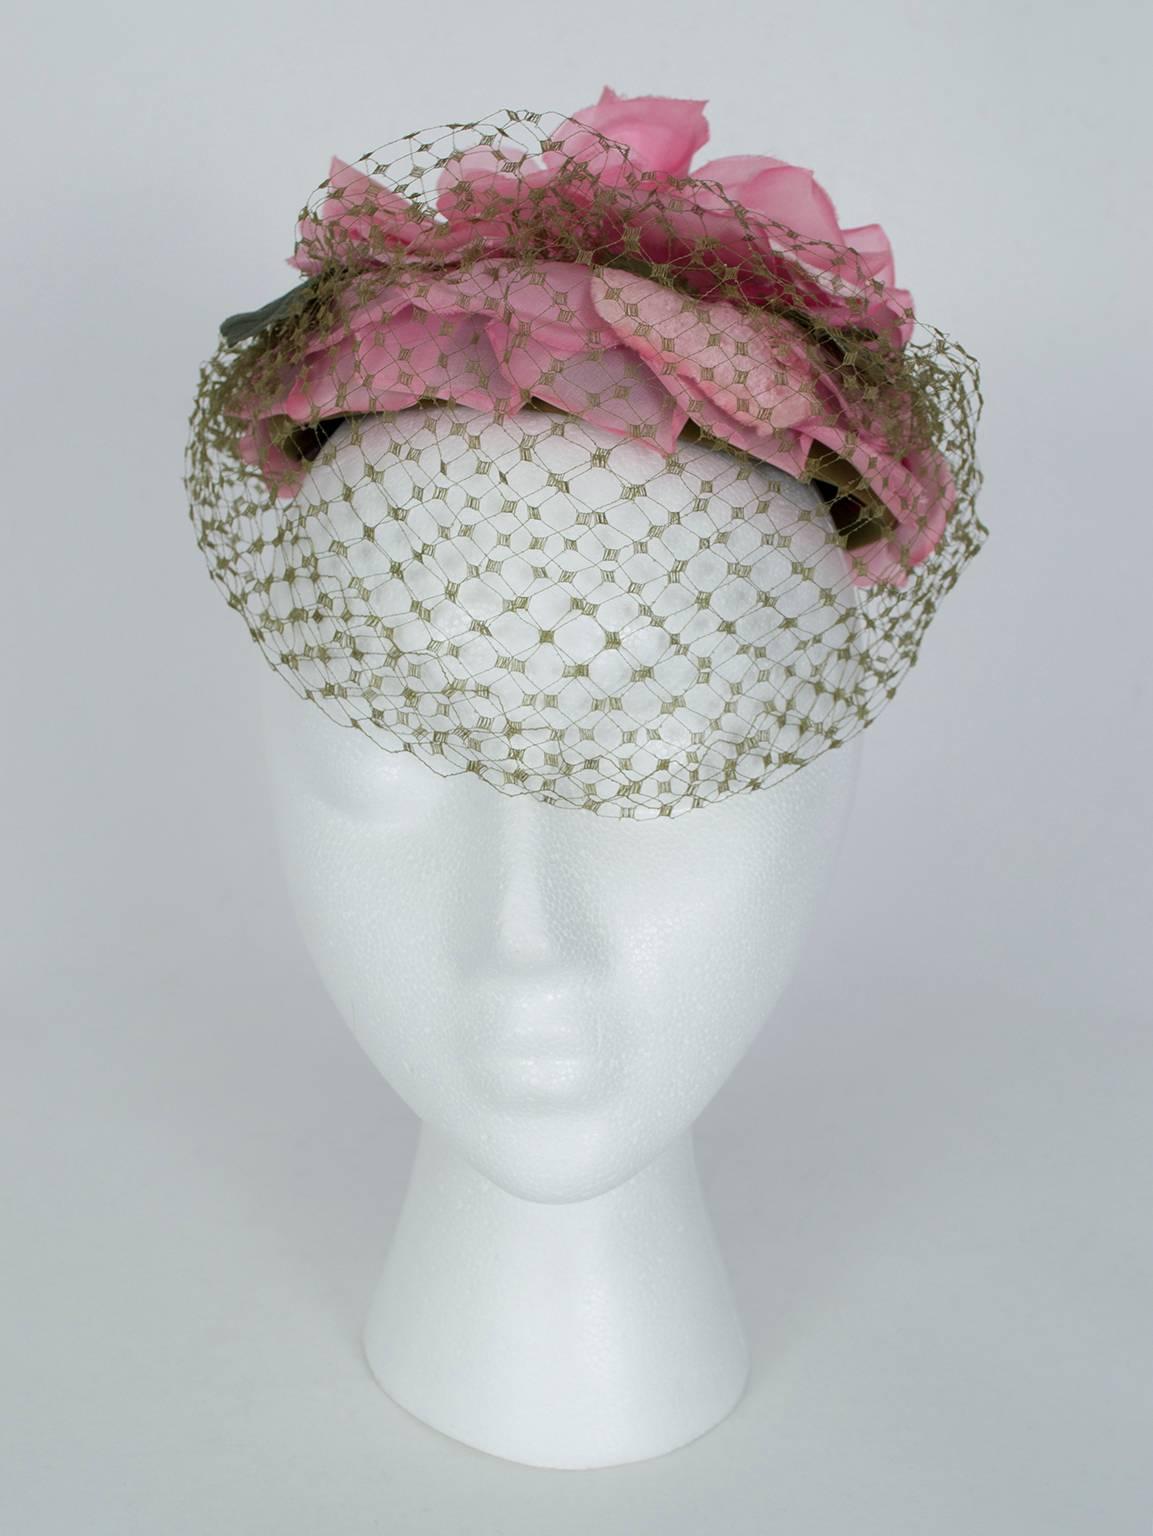 Favored by Audrey Hepburn and often photographed by Henry Clarke, French milliner Gilbert Orcel's hats are nothing short of wearable works of art. This one, with its playful pink and spring green color scheme, is supremely elegant due to its